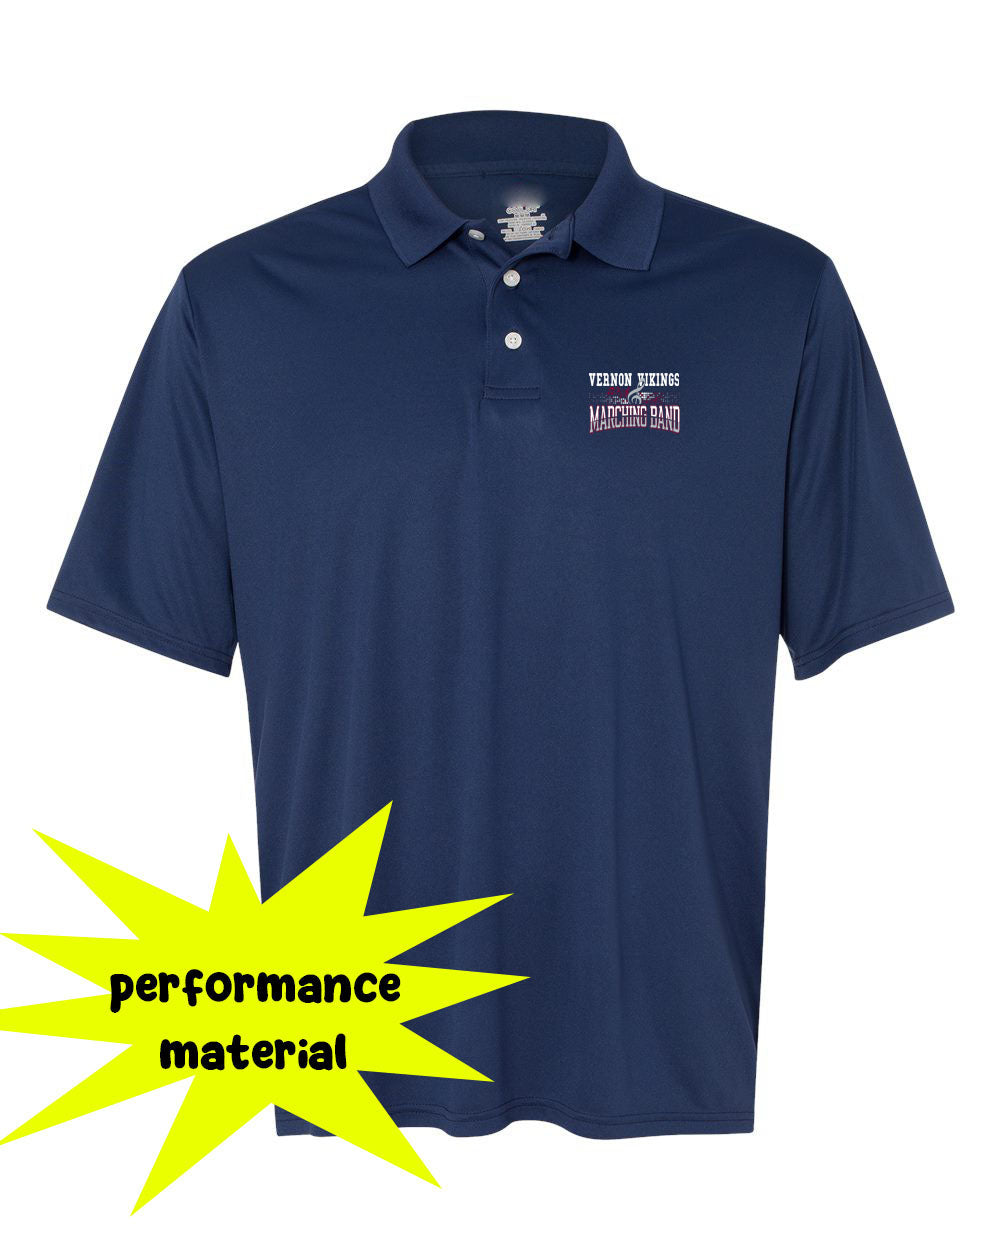 Vernon Marching Band Performance Material Polo T-Shirt Design 6